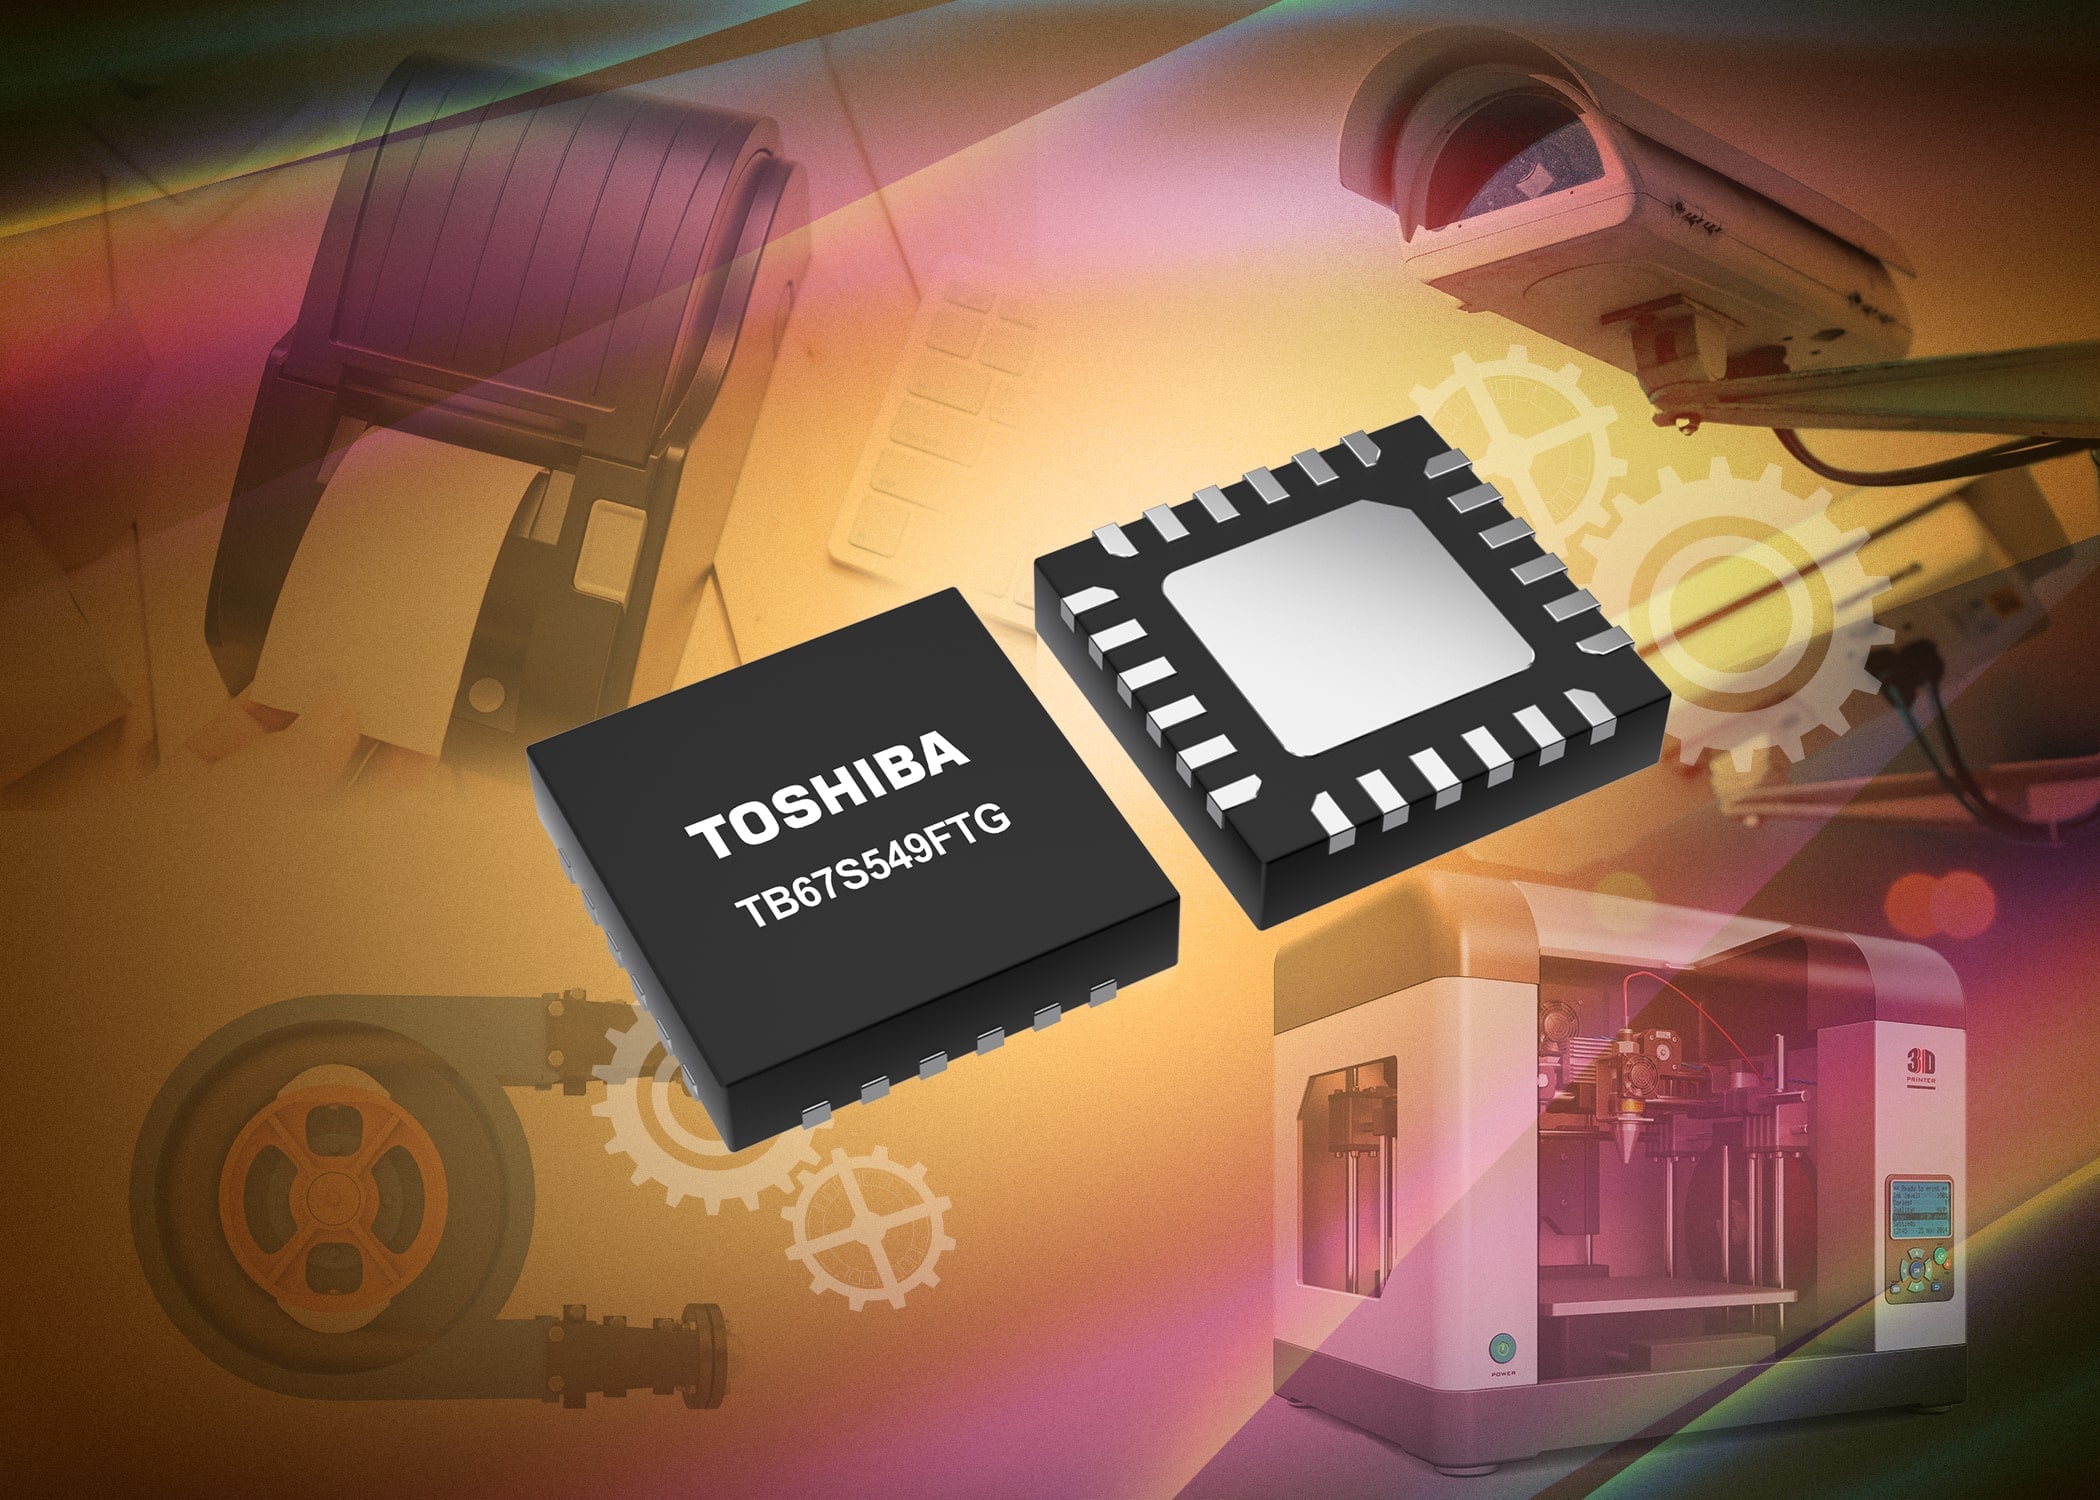 Toshiba announces 4.5V-33V stepper motor driver in tiny package that saves space and simplifies design